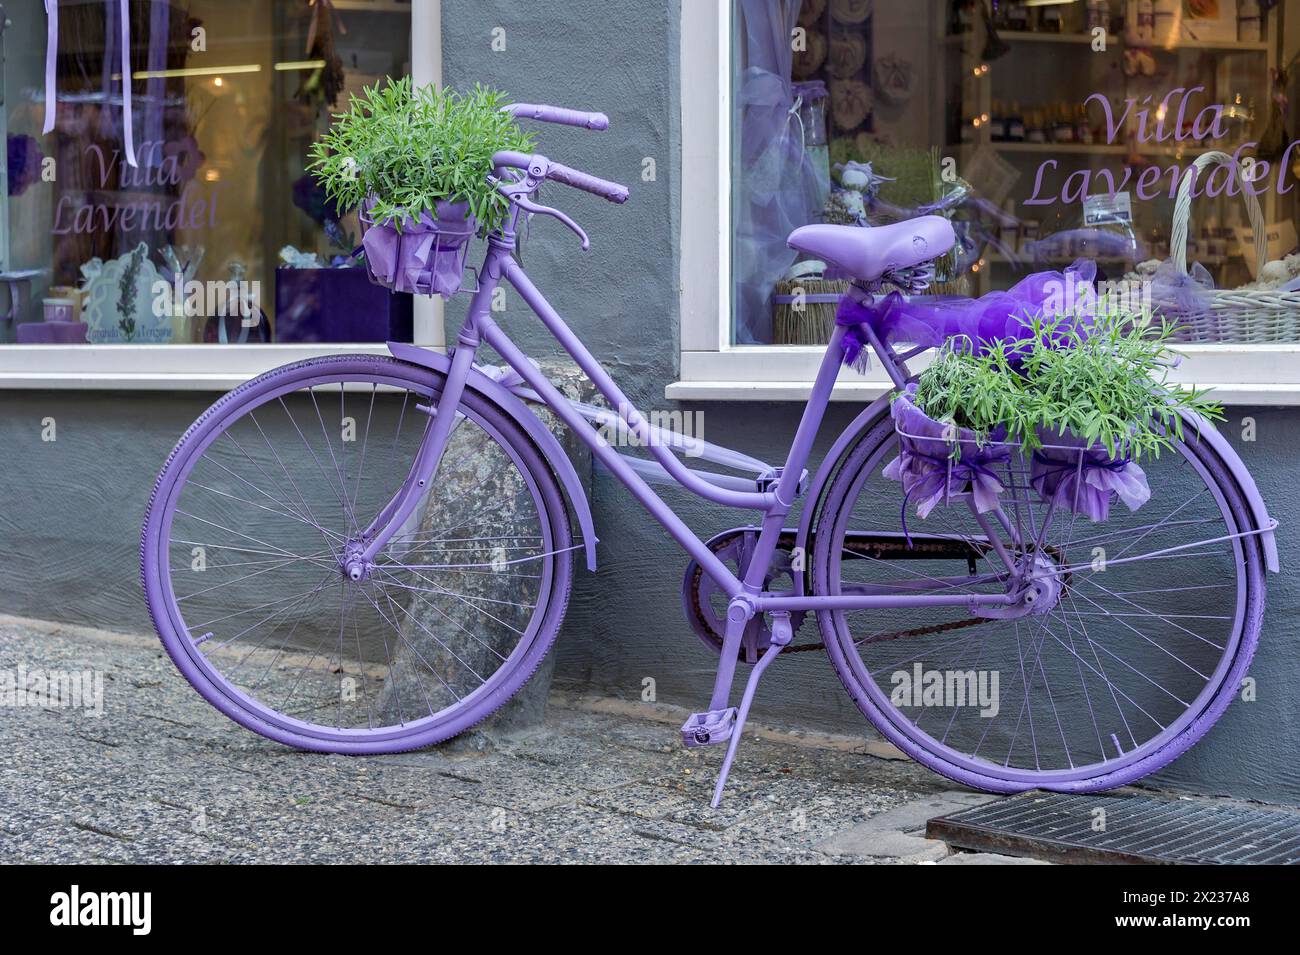 Purple bicycle, plant pots with lavender (Lavandula vera) in front of a shop in the historic city centre, Limburg an der Lahn, Hesse, Germany Stock Photo